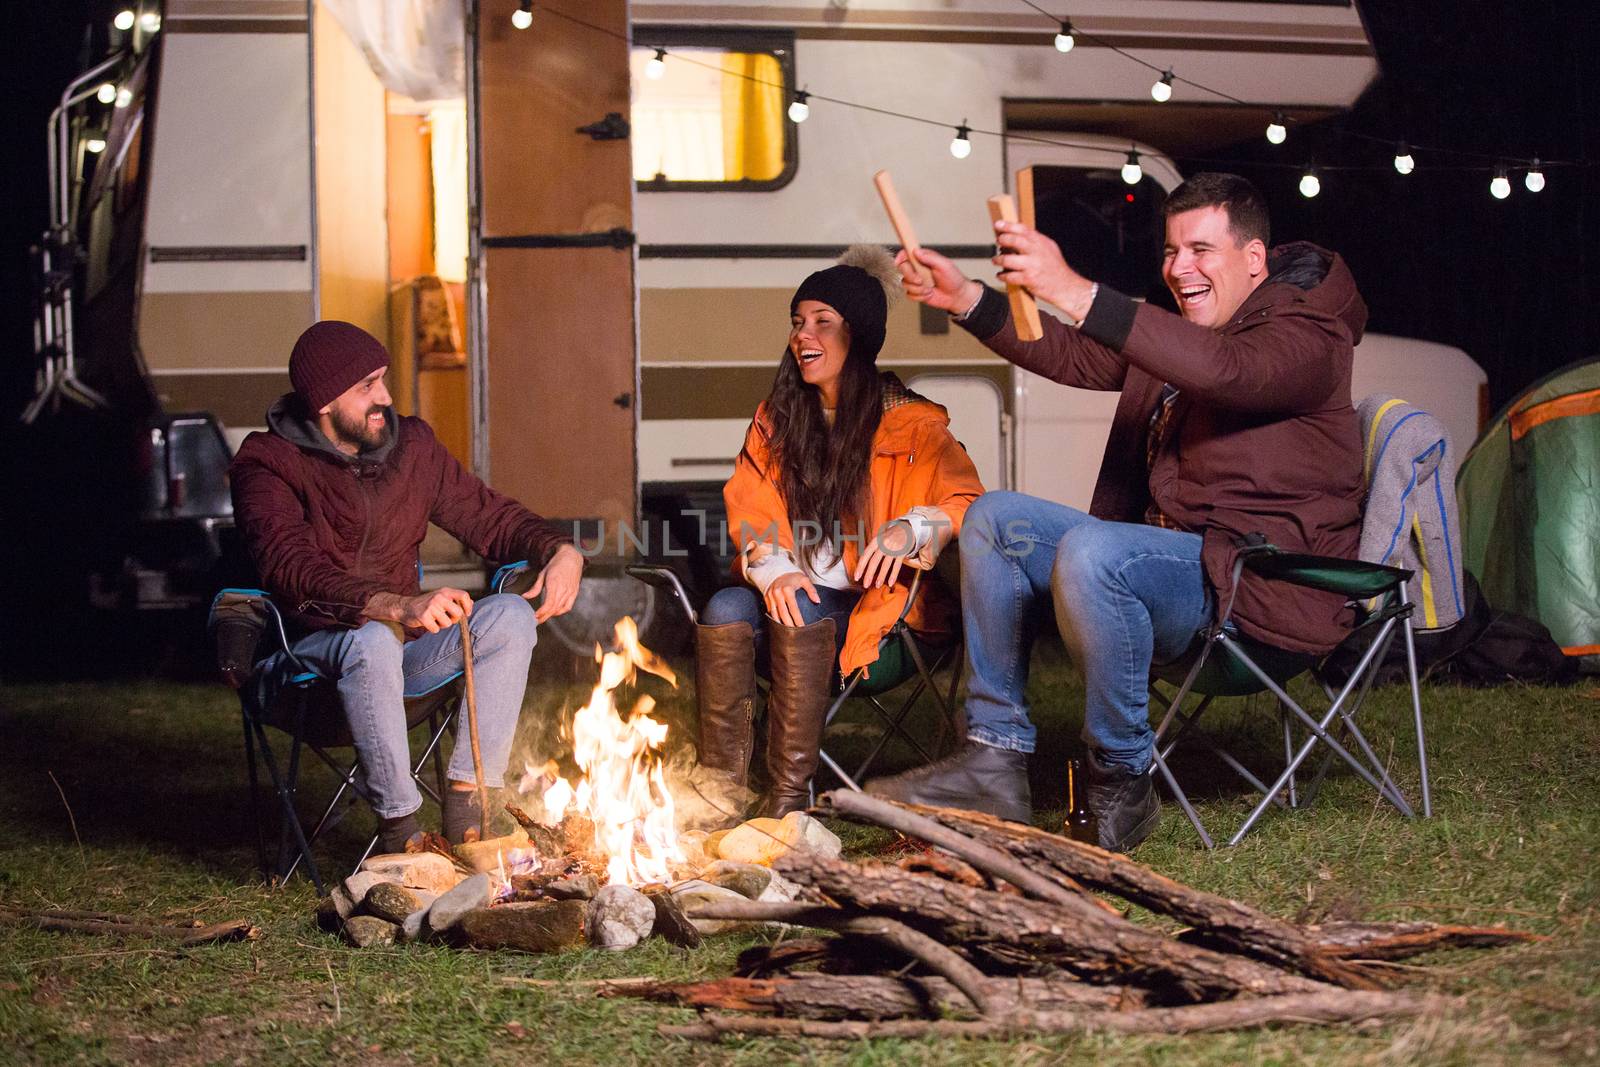 Group of close friends warming up around camp fire and laughing together. Retro camper van.